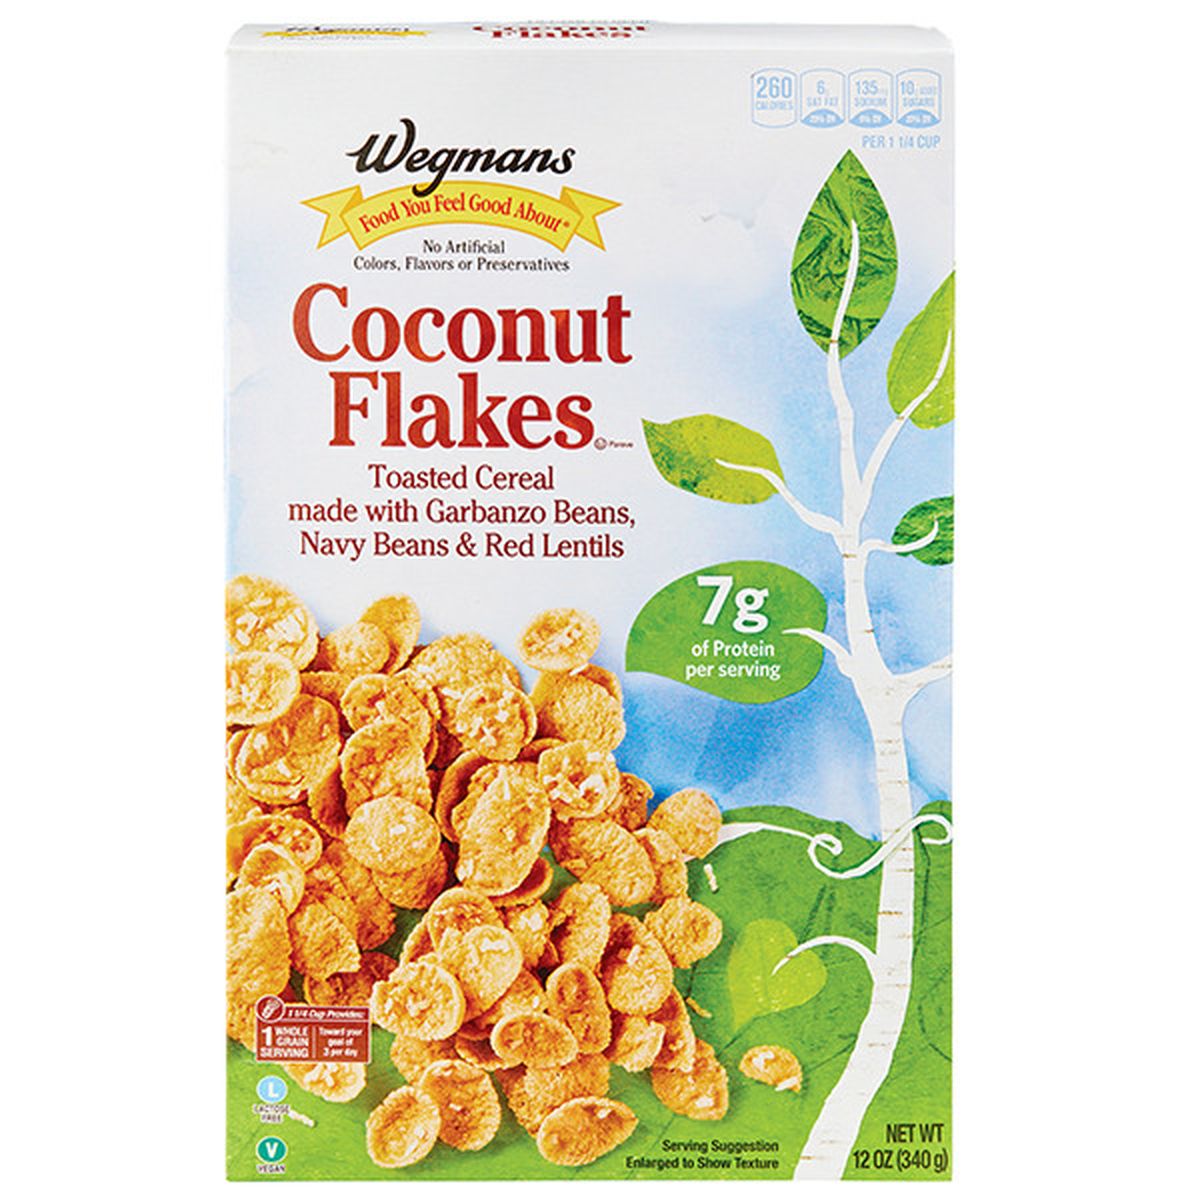 Calories in Wegmans Bean Based Coconut Flakes Cereal